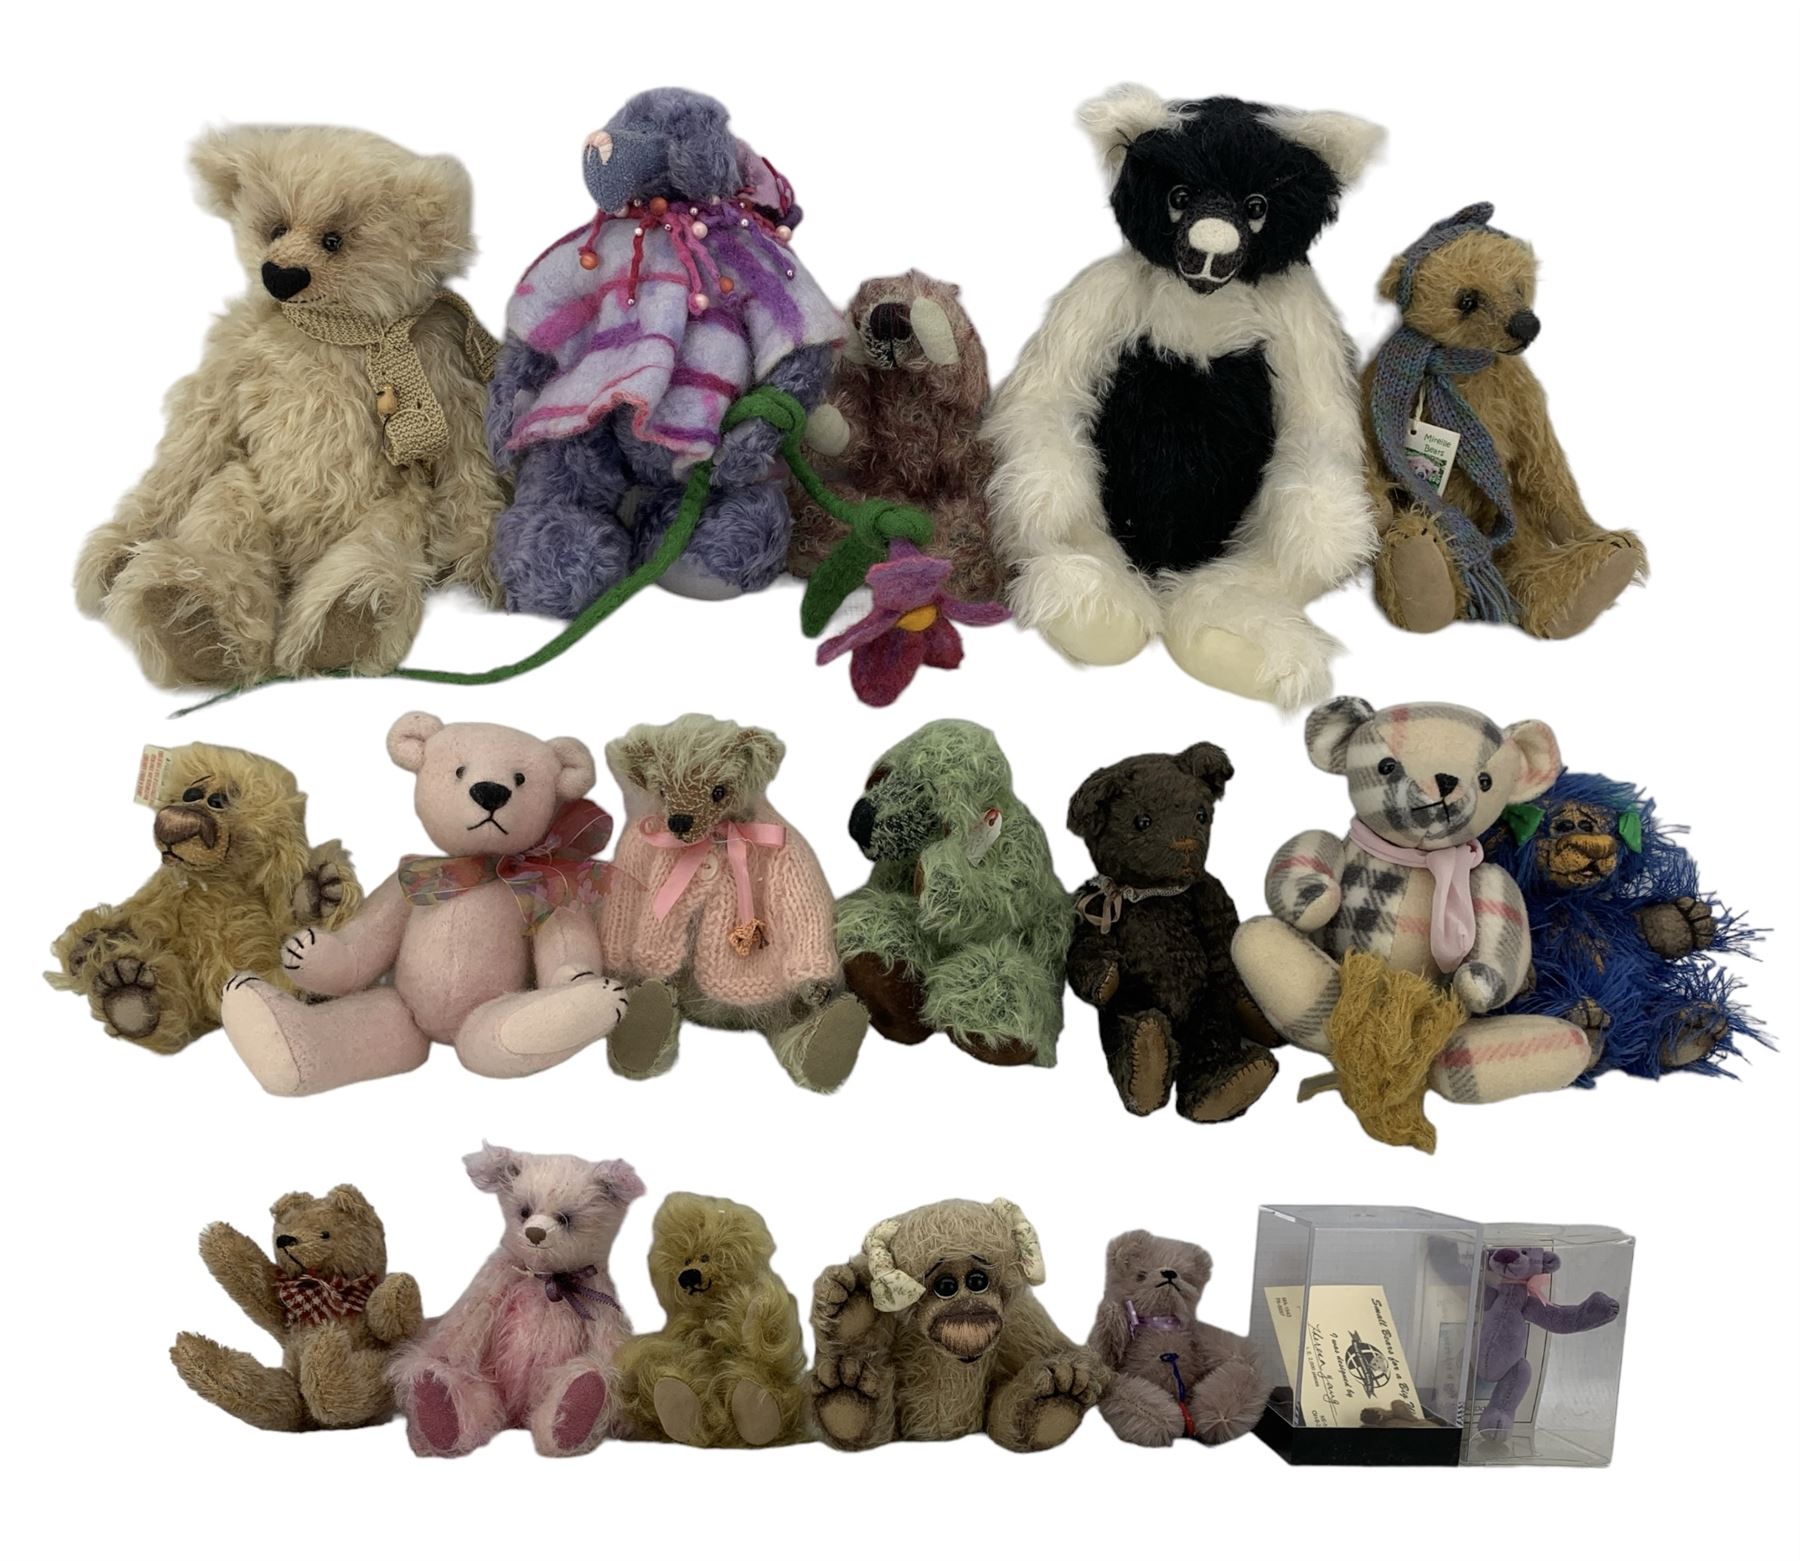 Teddy Bears to include Traditional Treasures by Jean Bishop